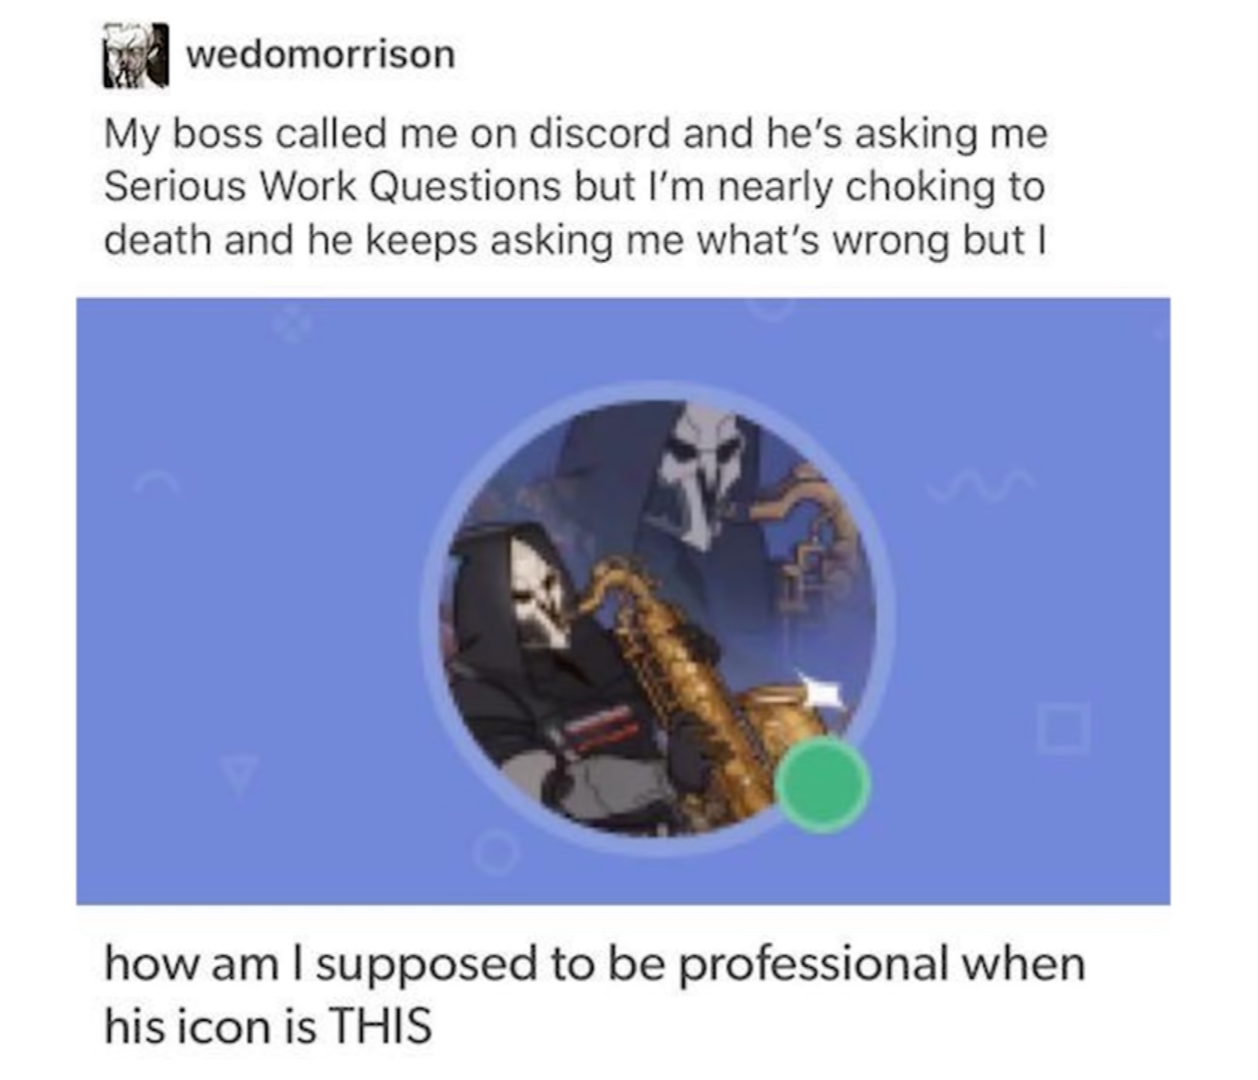 gaming memes -- boss discord meme - baie wedomorrison My boss called me on discord and he's asking me Serious Work Questions but I'm nearly choking to death and he keeps asking me what's wrong but I how am I supposed to be professional when his icon is Th